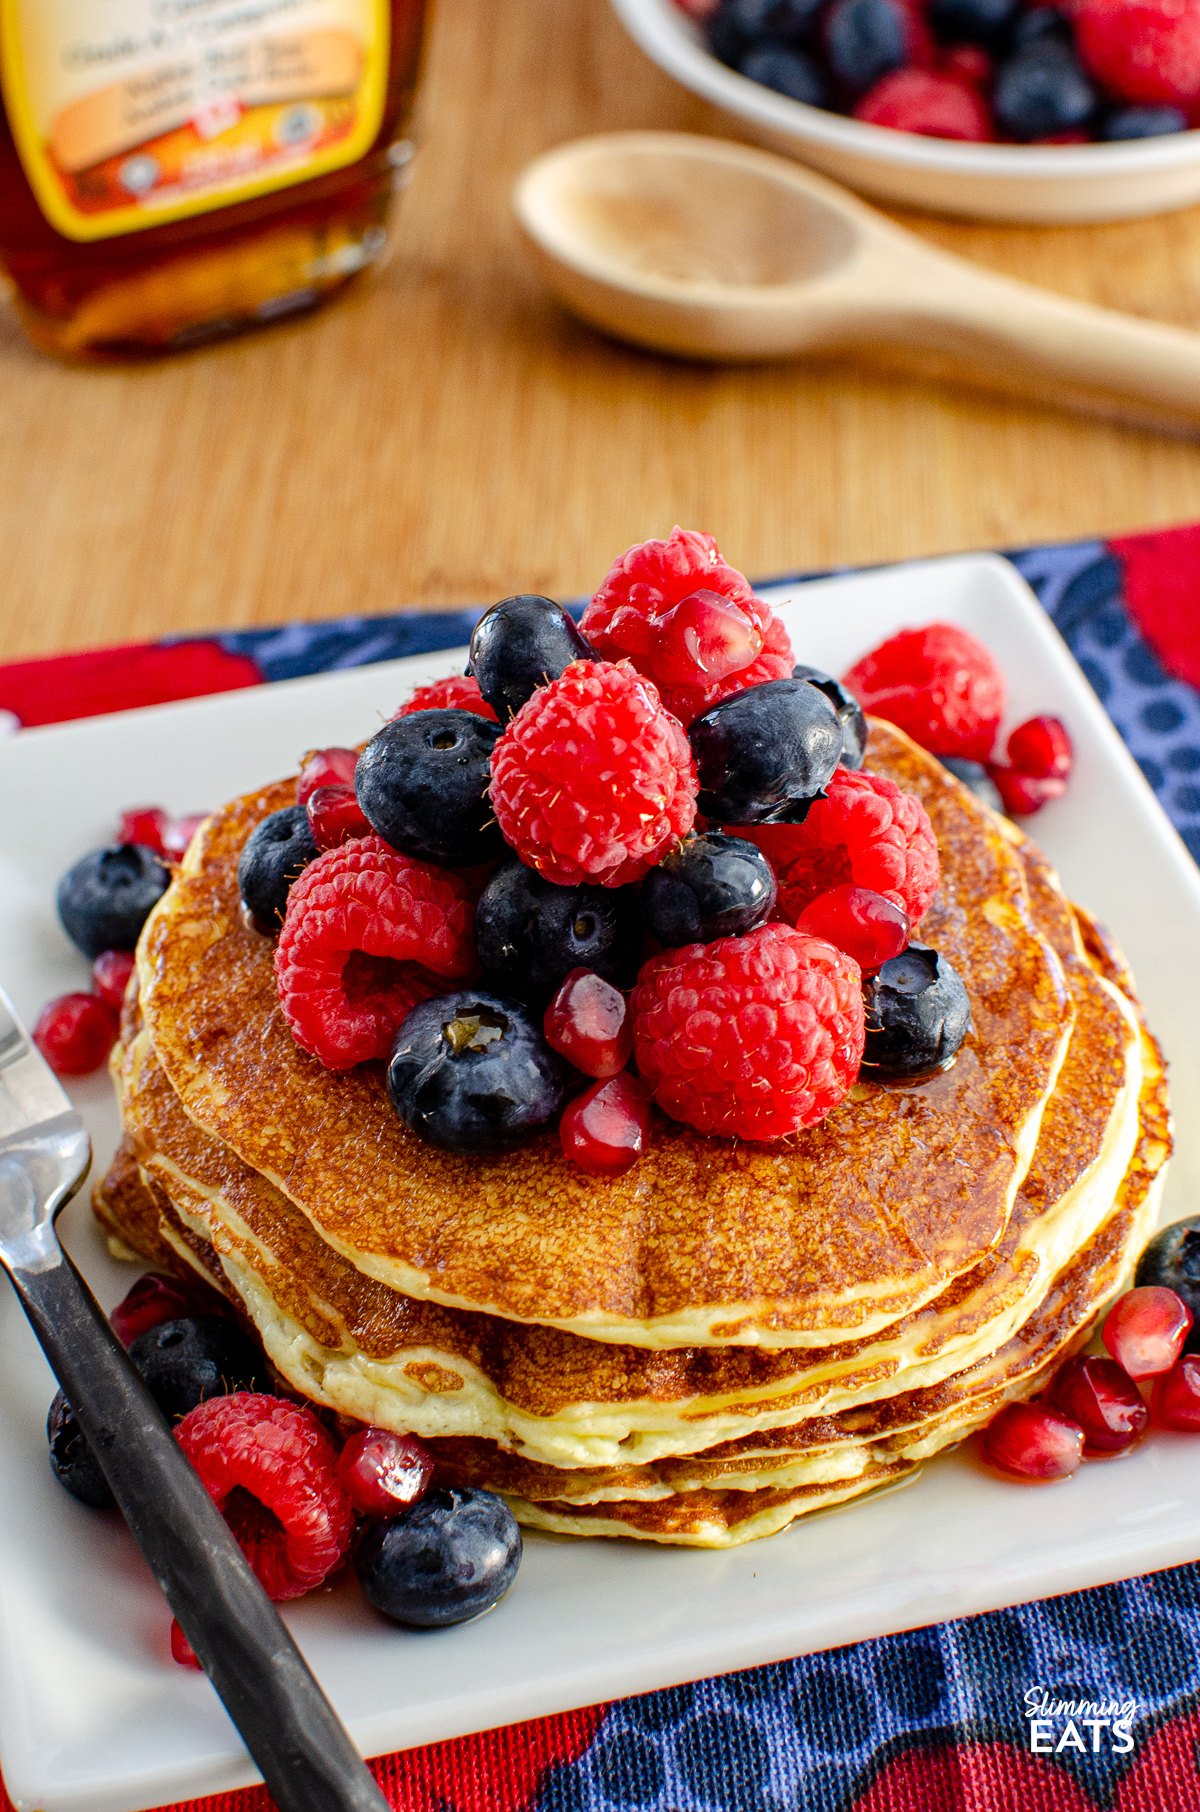 High Protein Cottage Cheese Pancakes served on a white plate, garnished with a variety of mixed berries and a light drizzle of maple syrup, with a bottle of maple syrup and additional berries in the background.